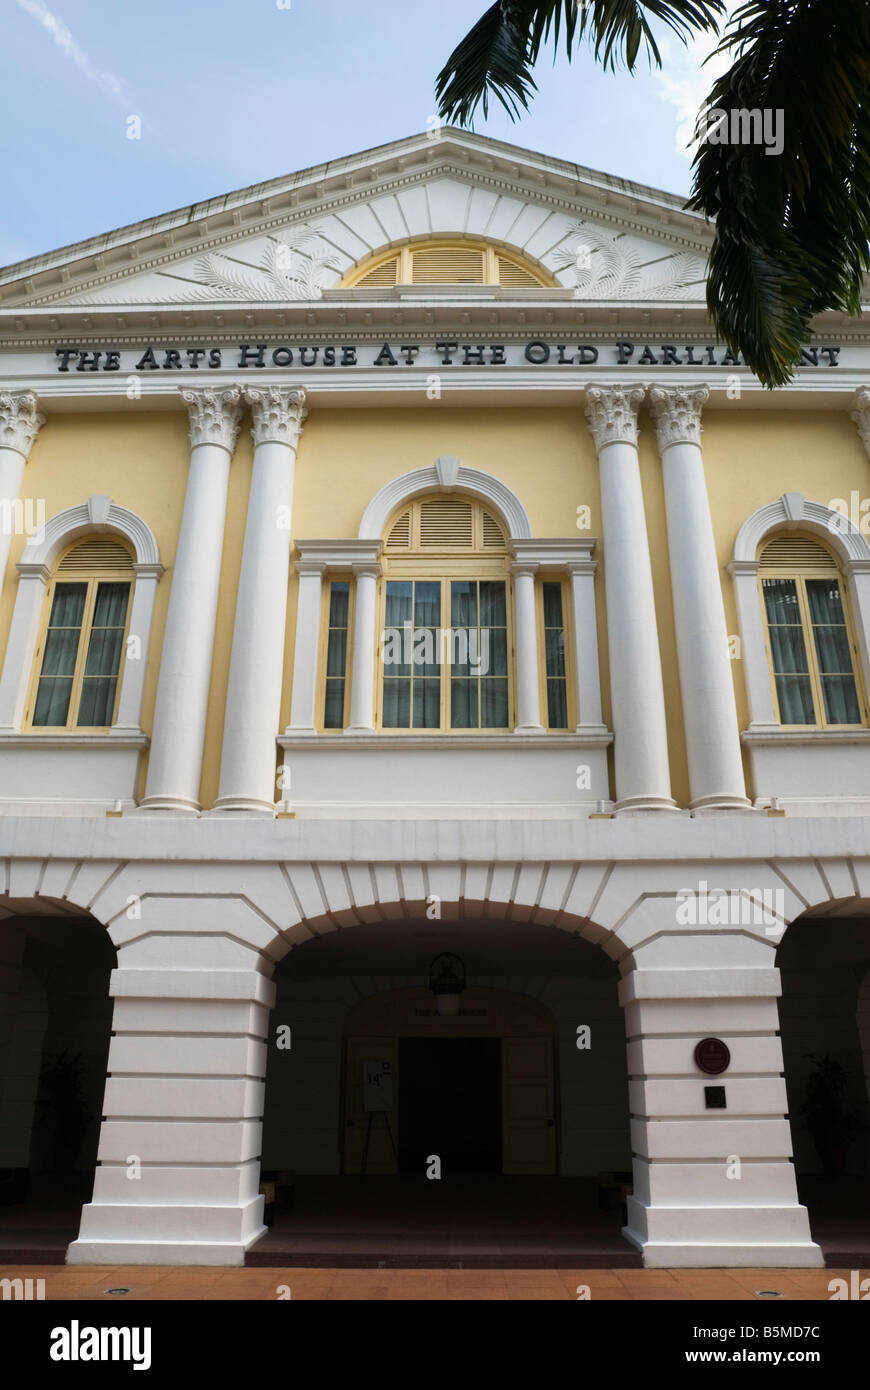 Facade of the Arts House at the Old Parliament House which was built in 1827 in Neo-Palladian style, Colonial District, Singapore Stock Photo